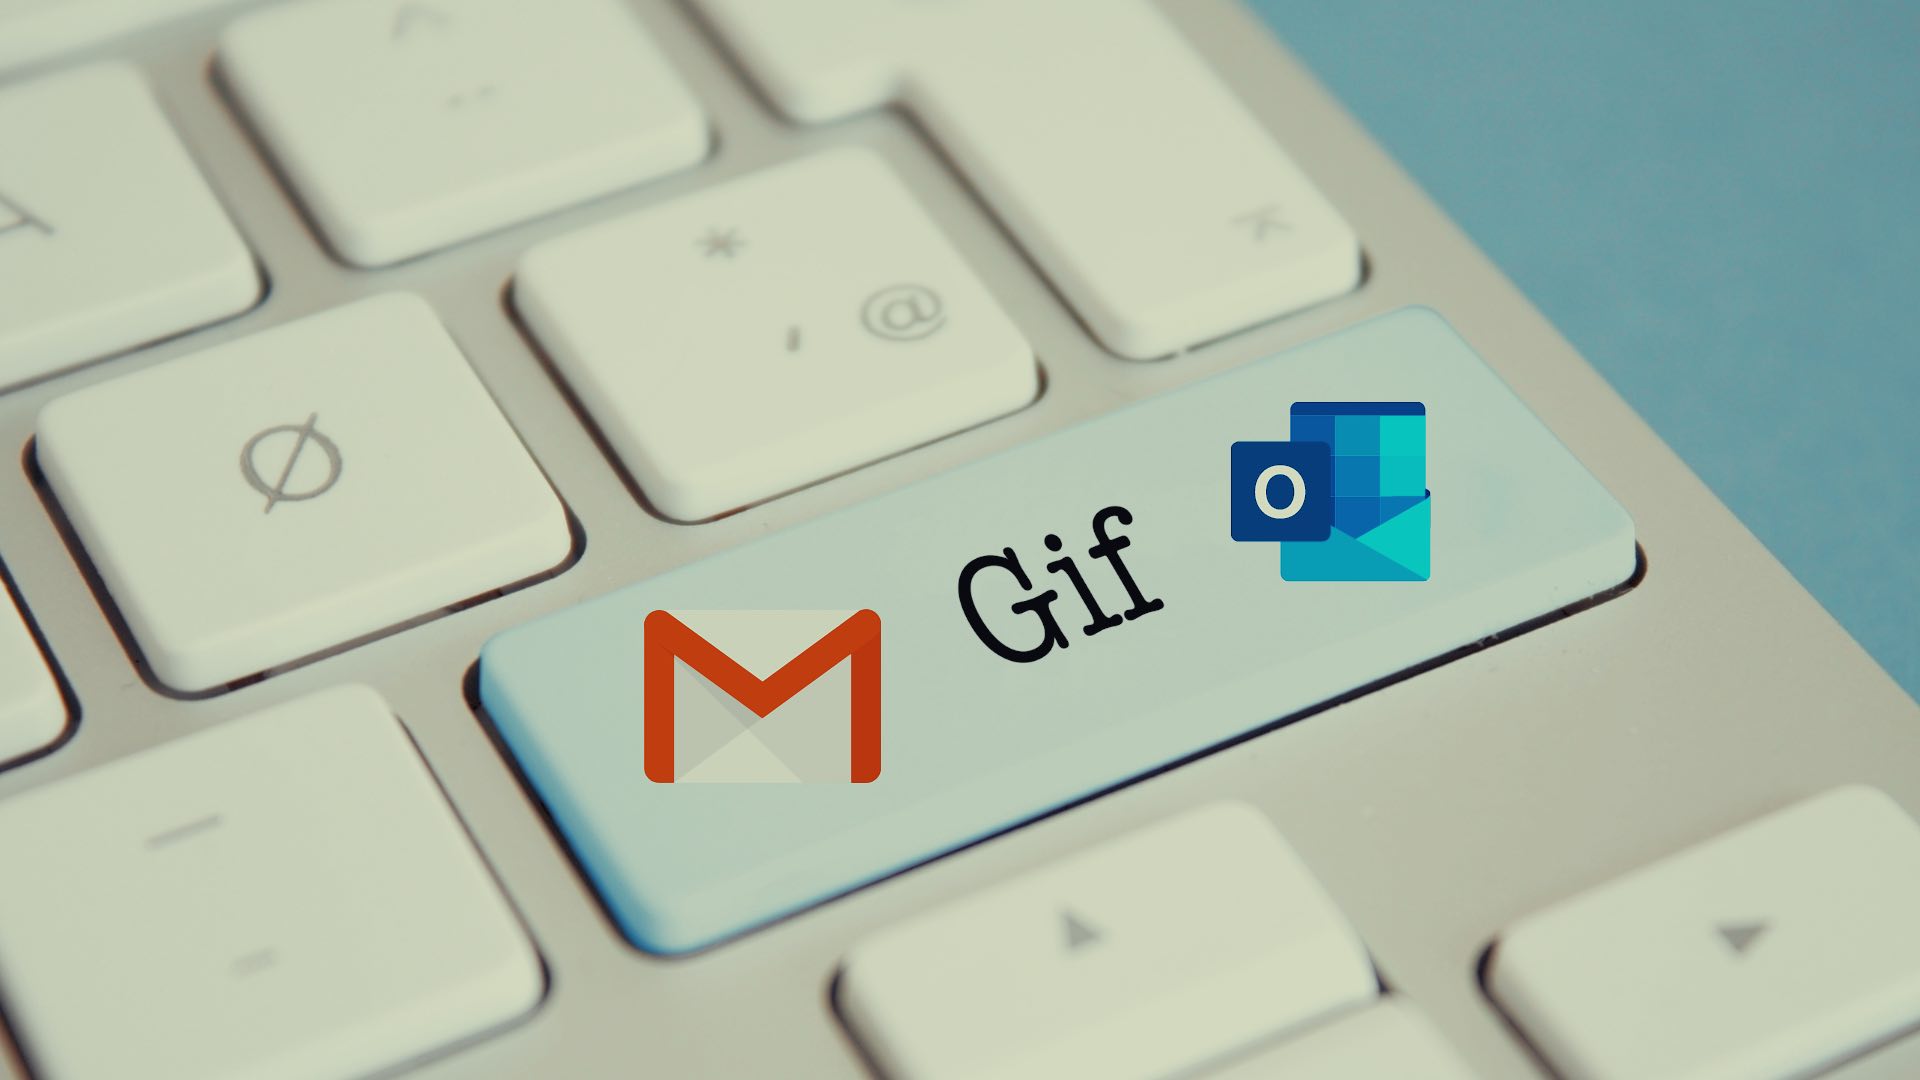 How to Send GIFs in Microsoft Outlook and Gmail